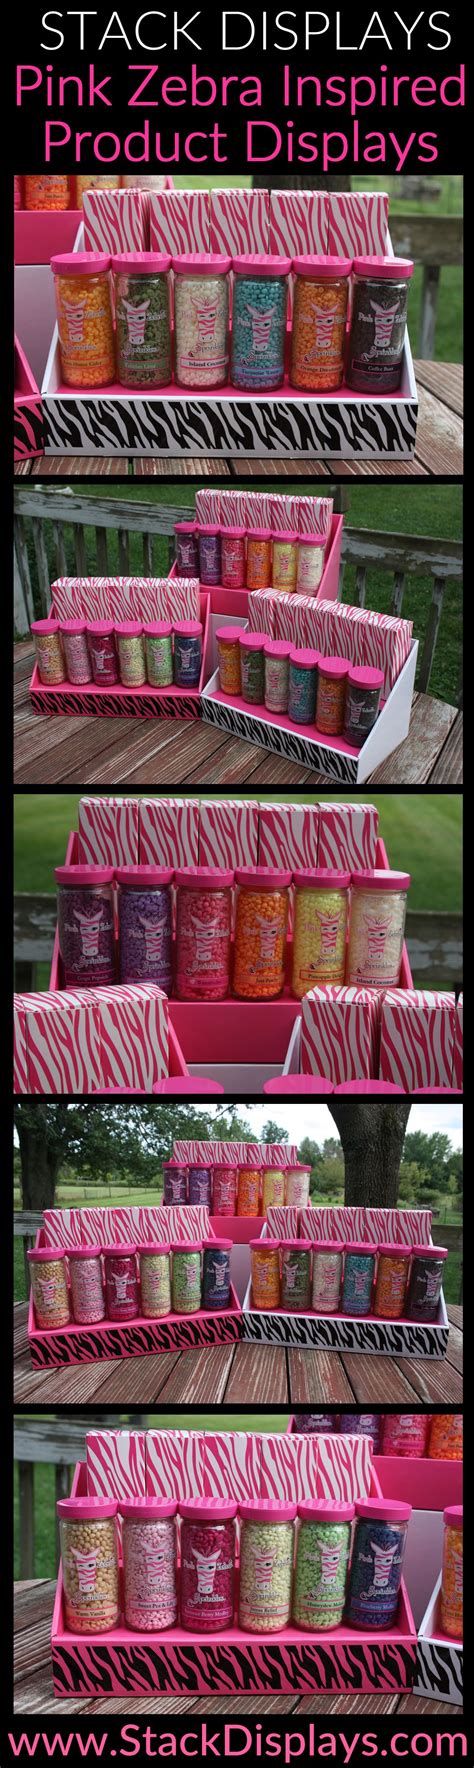 This display looks awesome! Pink Zebra Home Inspired displays by Stack Displays! Great for PZ ...